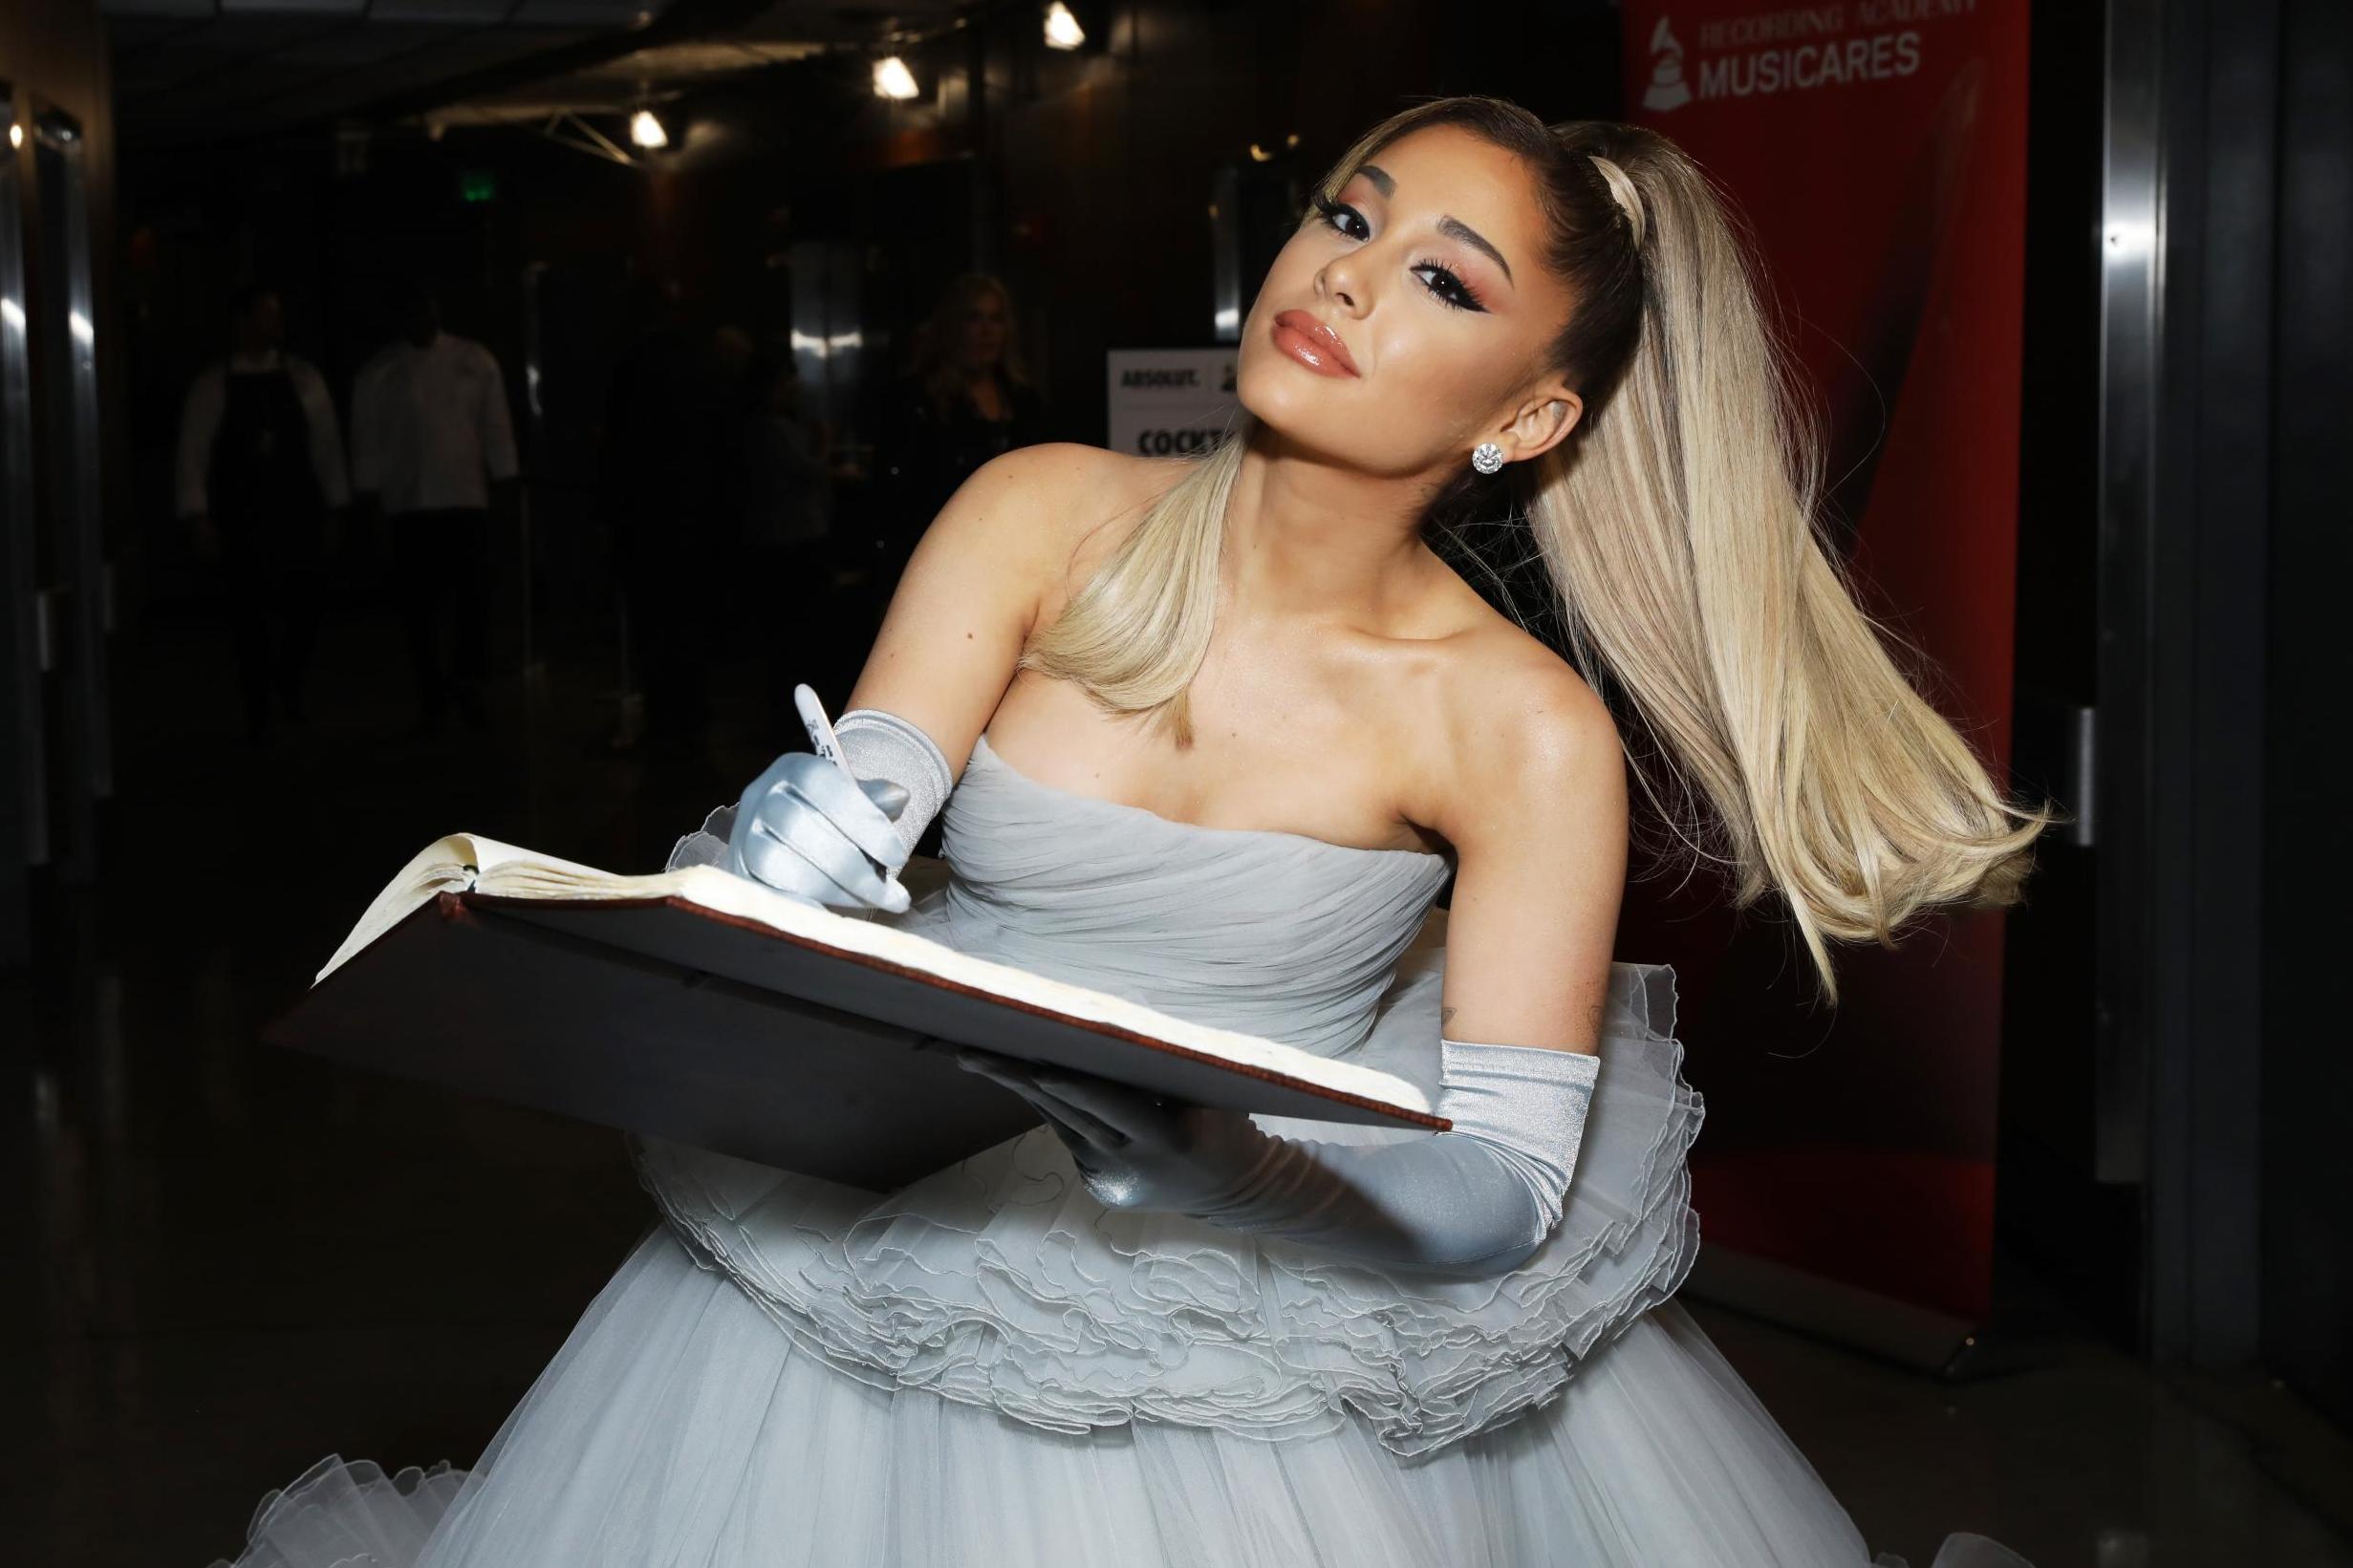 Ariana Grande on 26 January 2020 at the Grammys in Los Angeles.